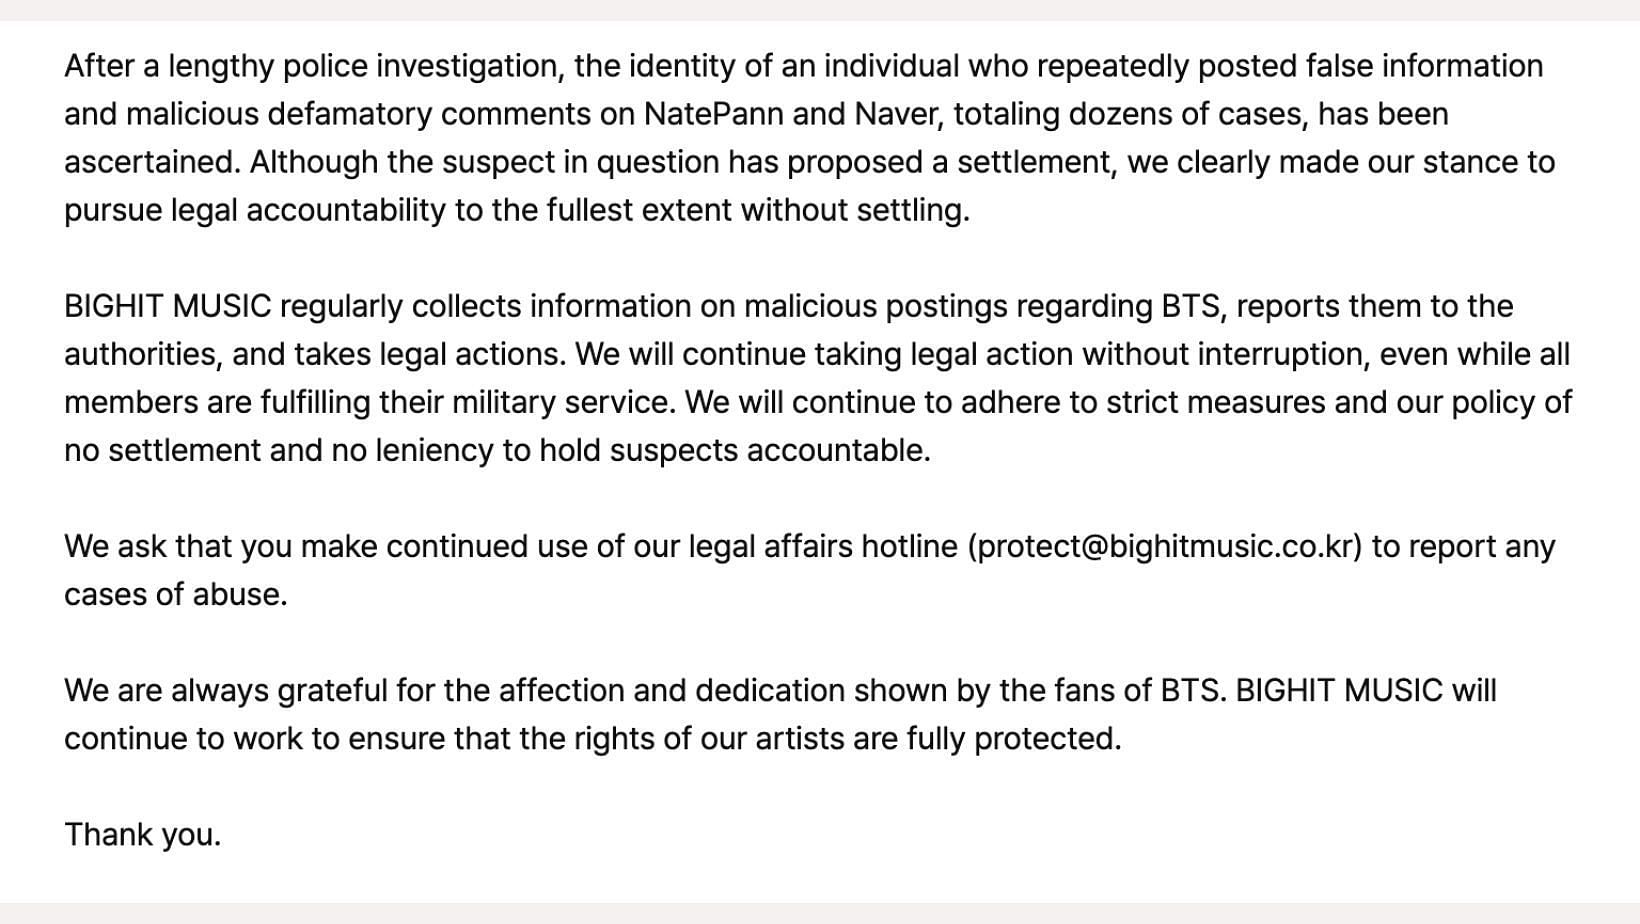 BIGHIT MUSIC initiates legal proceedings against perpetrators of malicious activities. (Image source: Weverse)